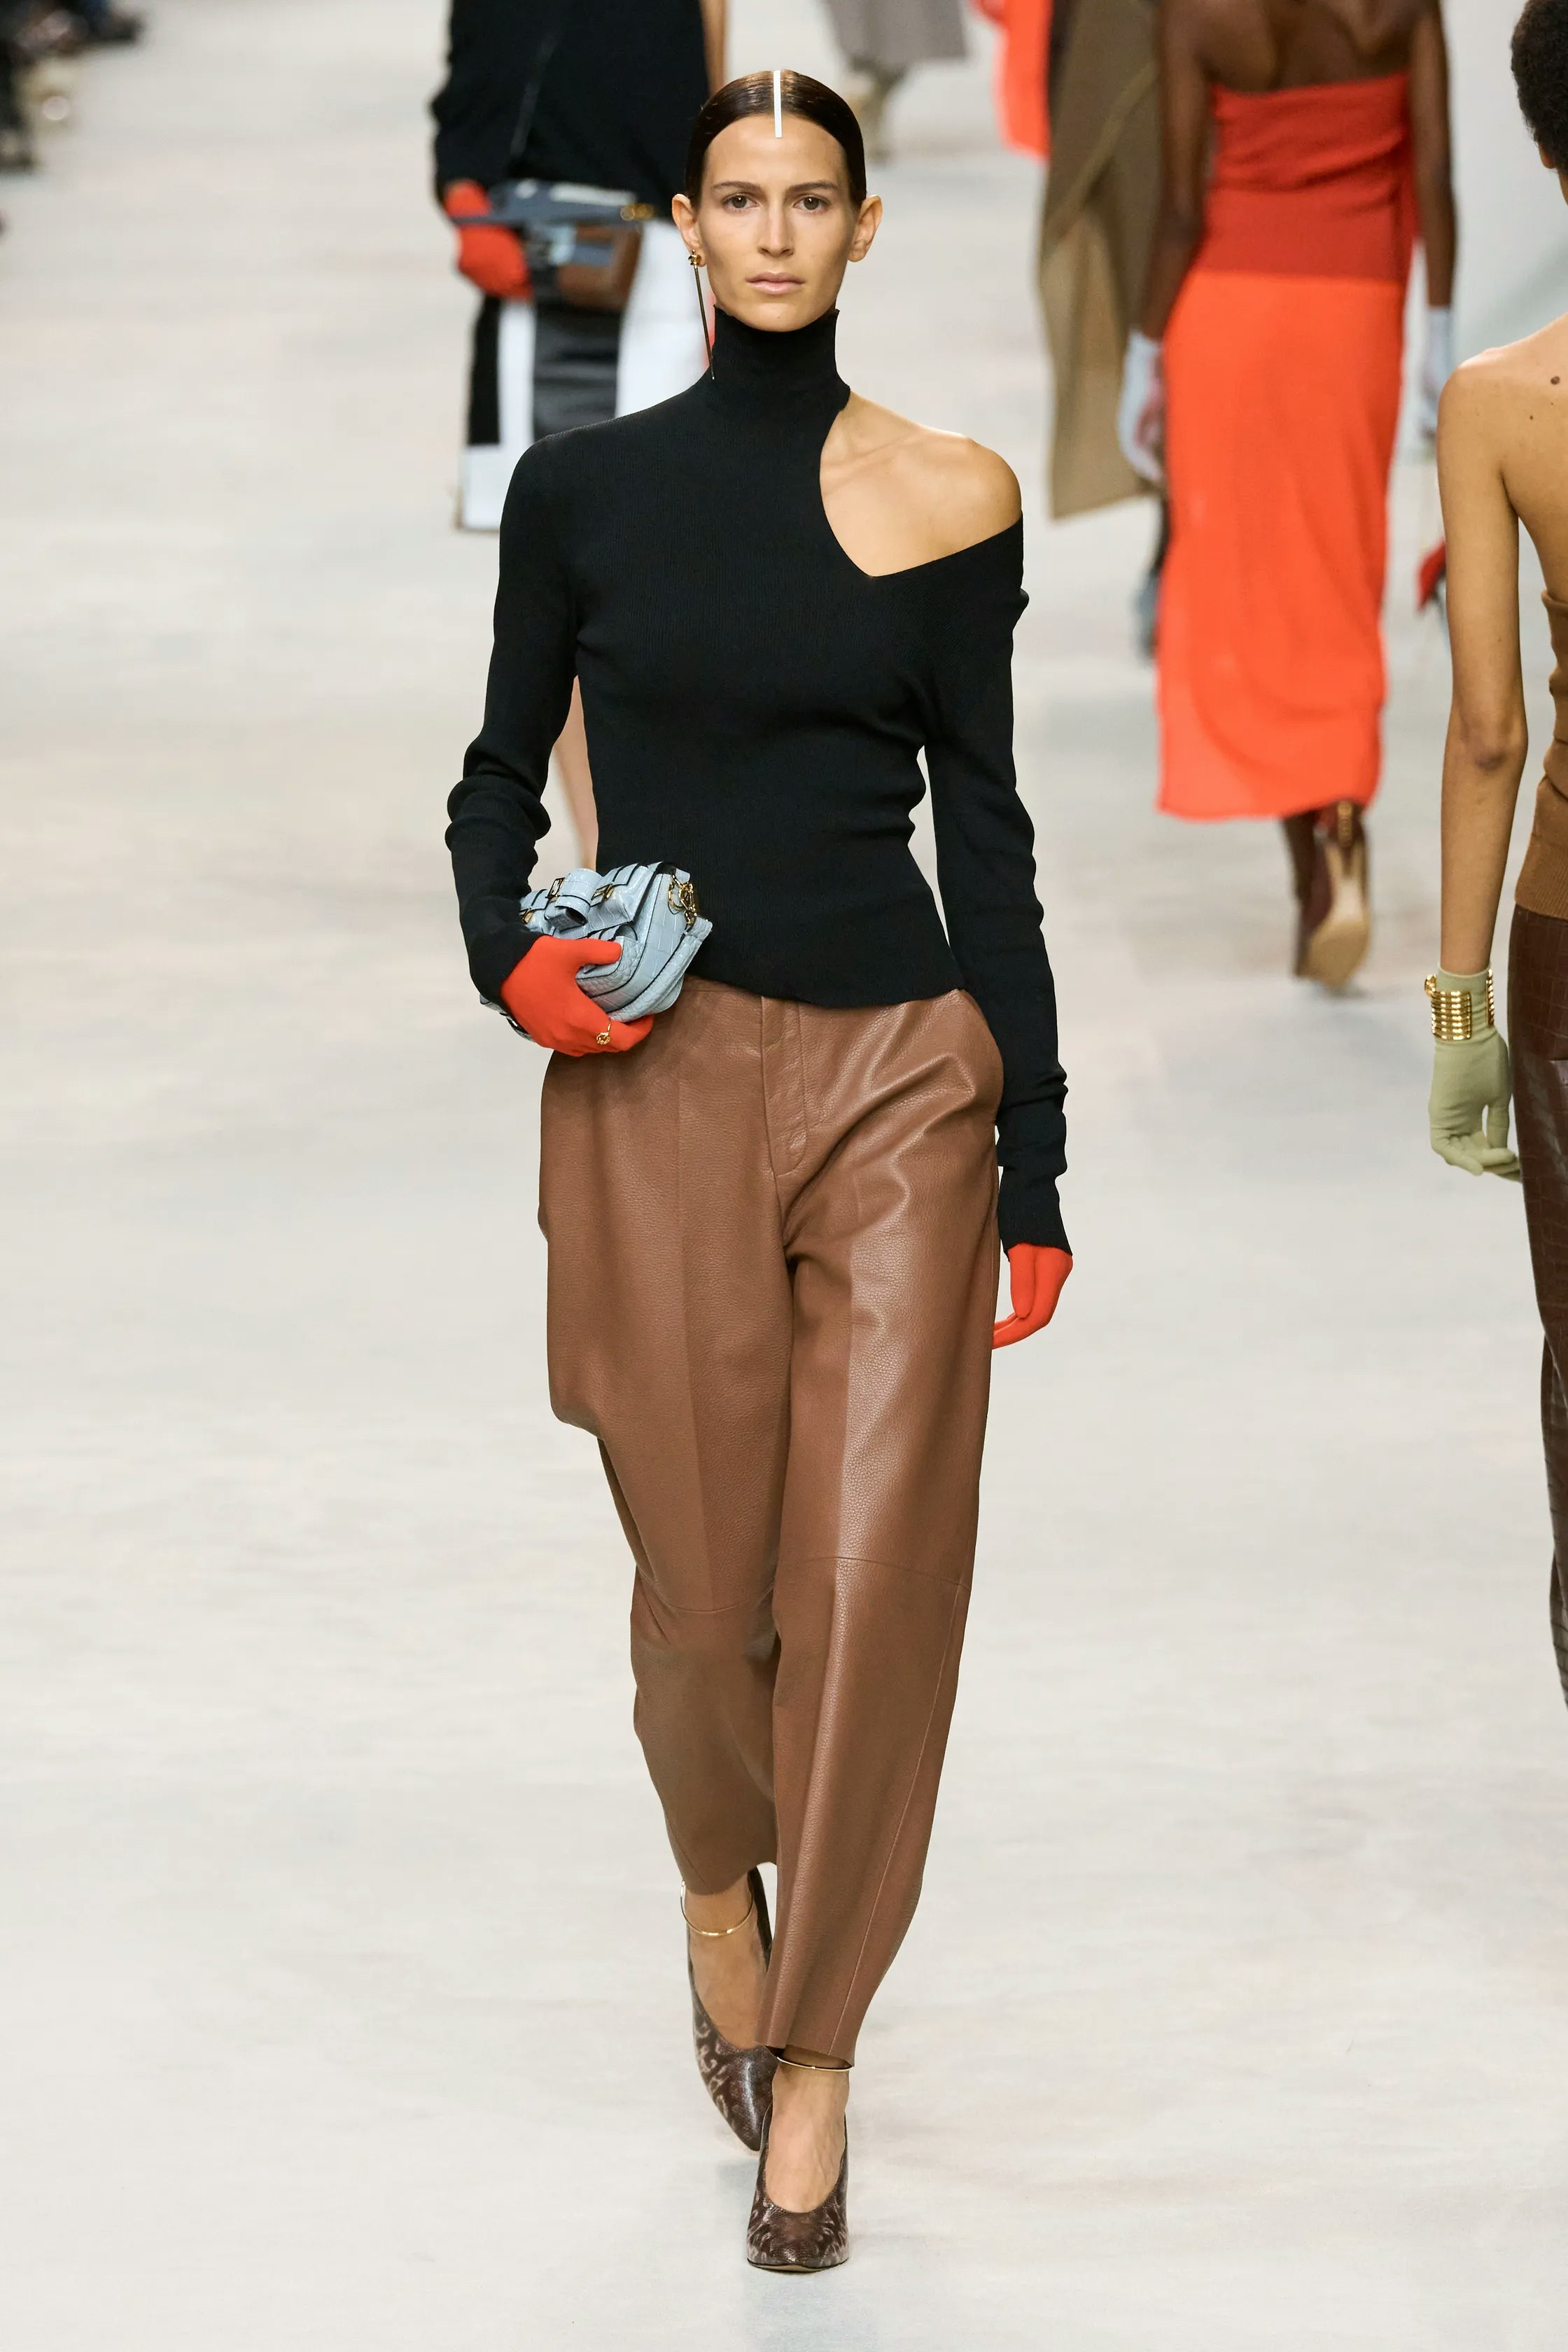 5 Leather Trouser Outfits Worth Recreating From The Runway